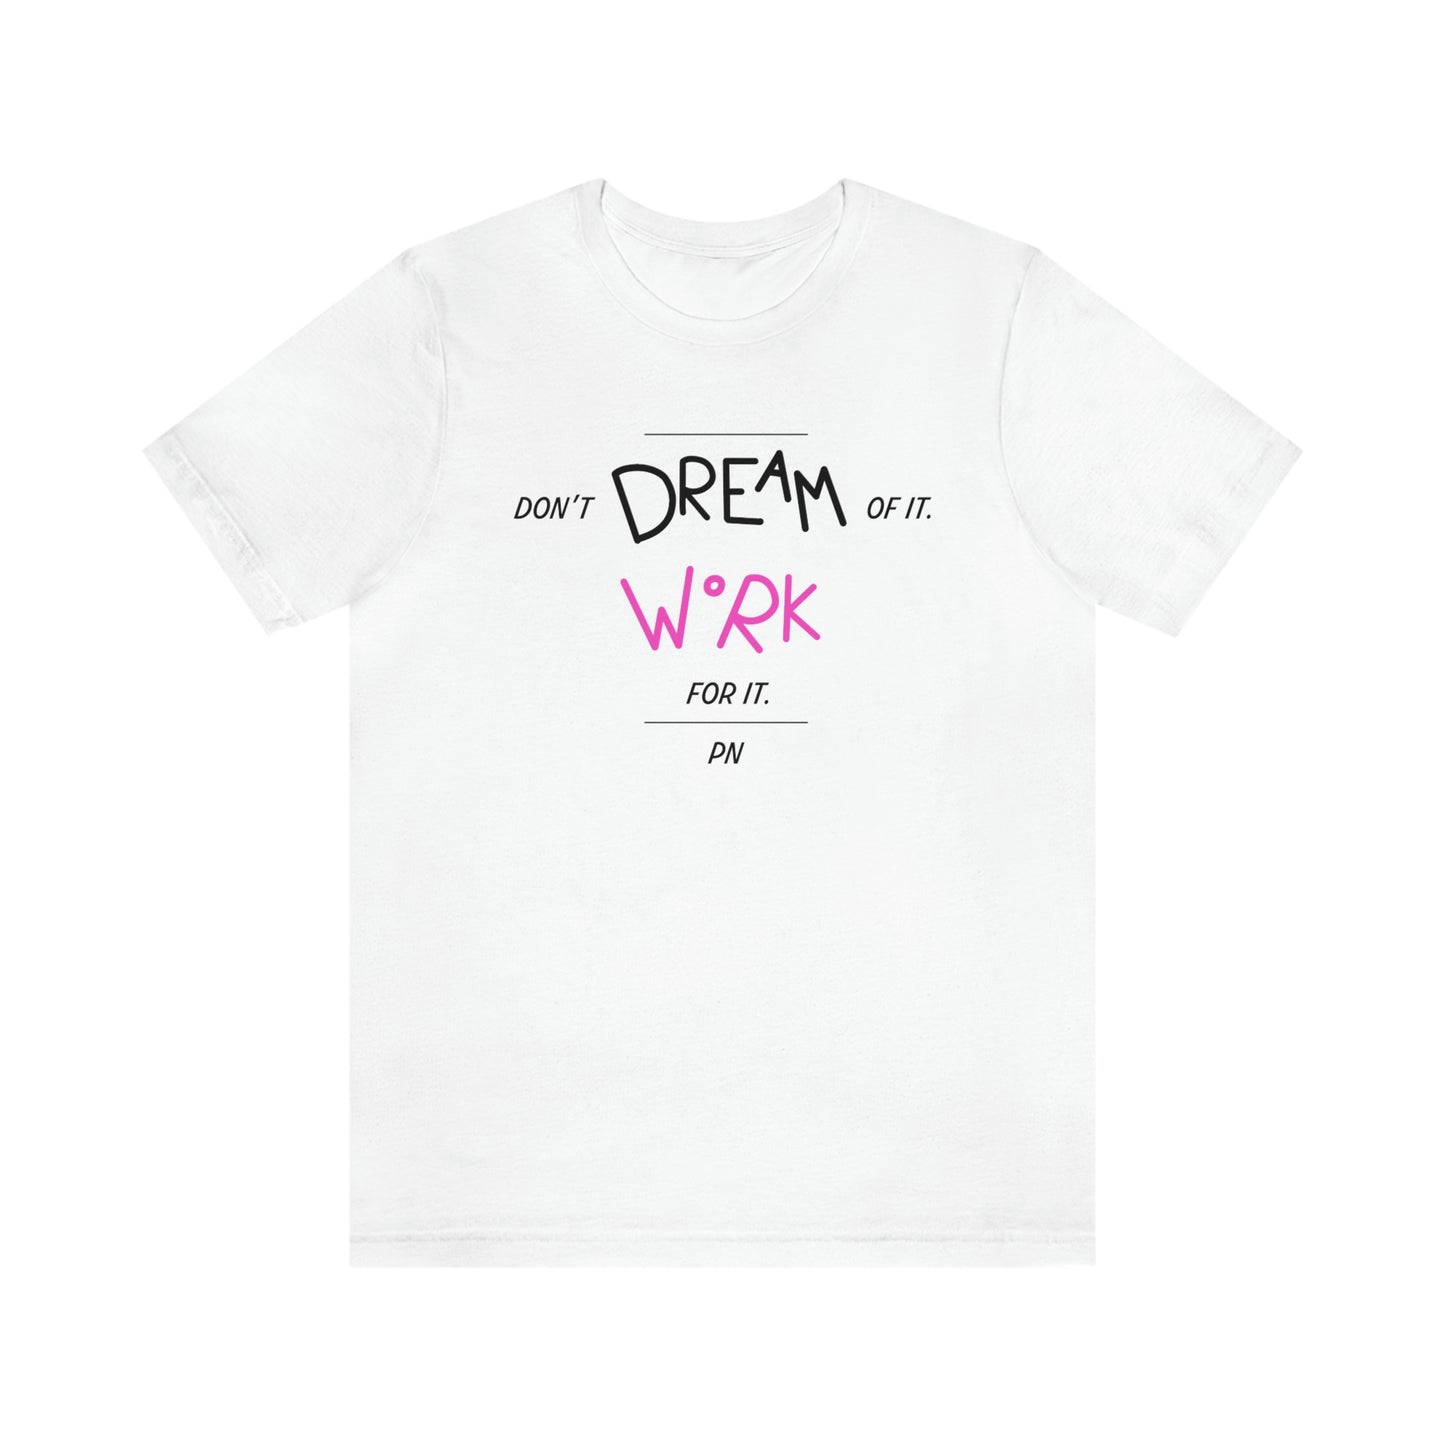 Polina Nikulochkina: Don't Dream For It Work For It Tee